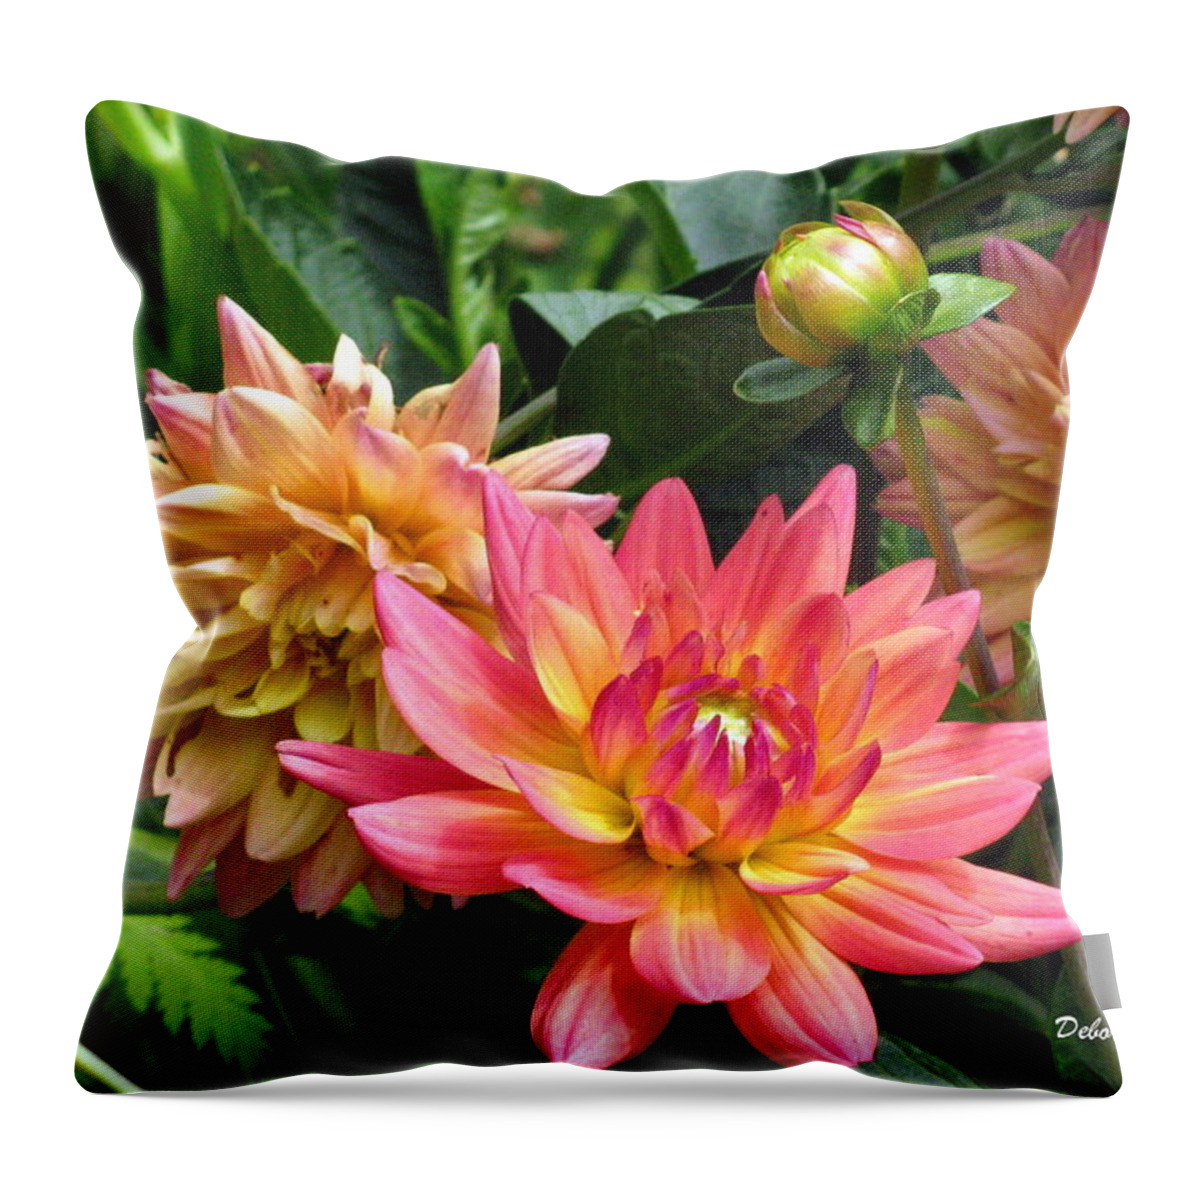 Flowers Throw Pillow featuring the photograph Fragrant Grouping by Deborah Crew-Johnson